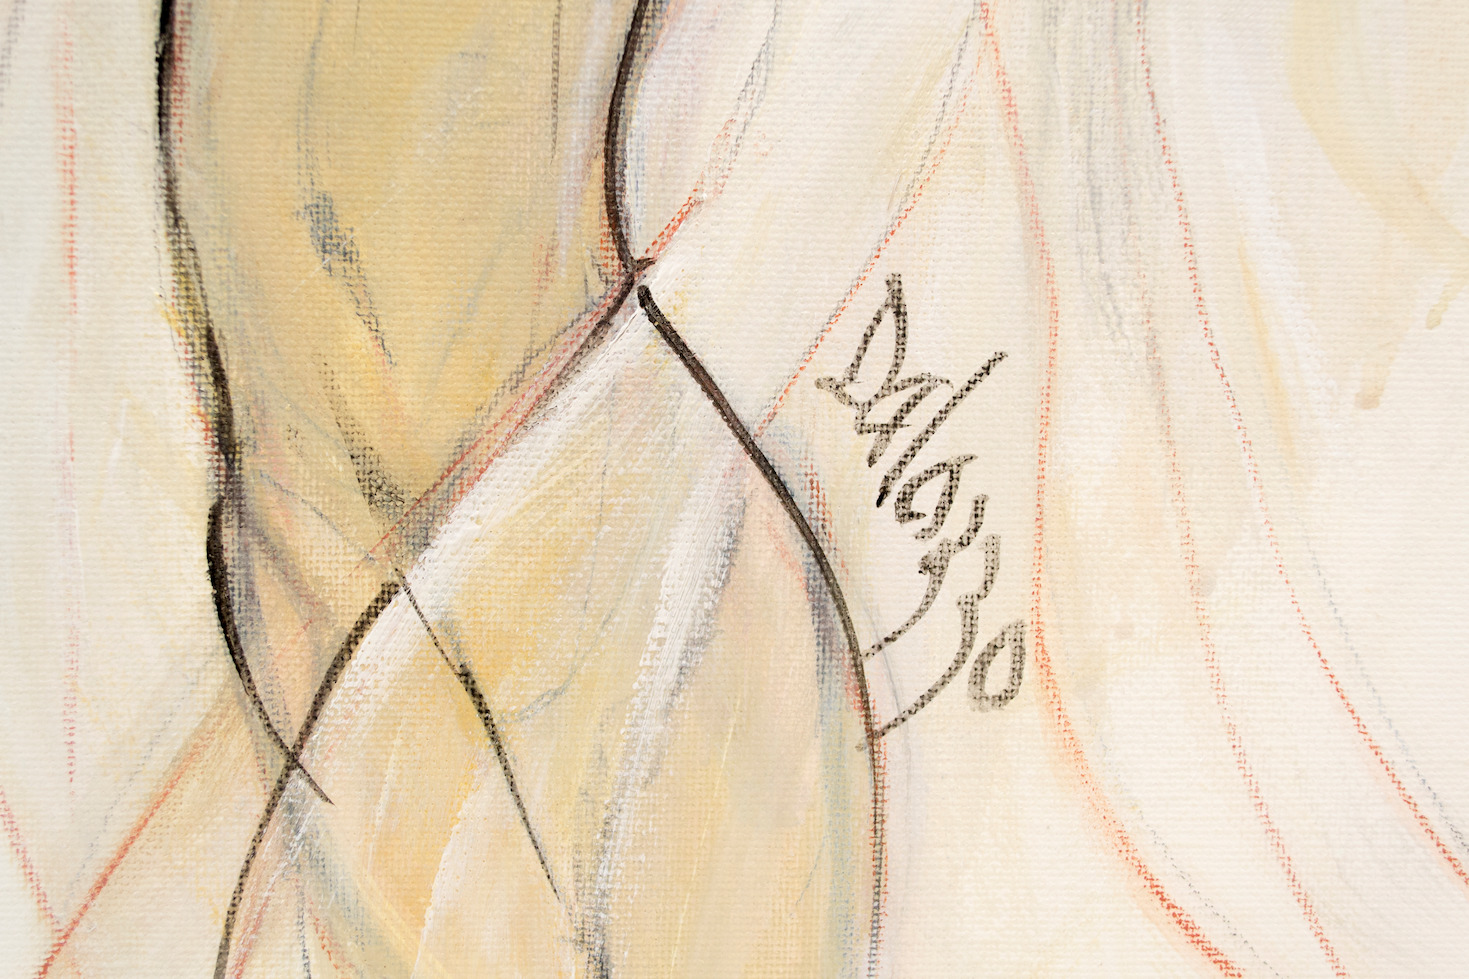 Close Up Signature Of Mixed Media Painting "Sensual Lines" By Lucette Dalozzo